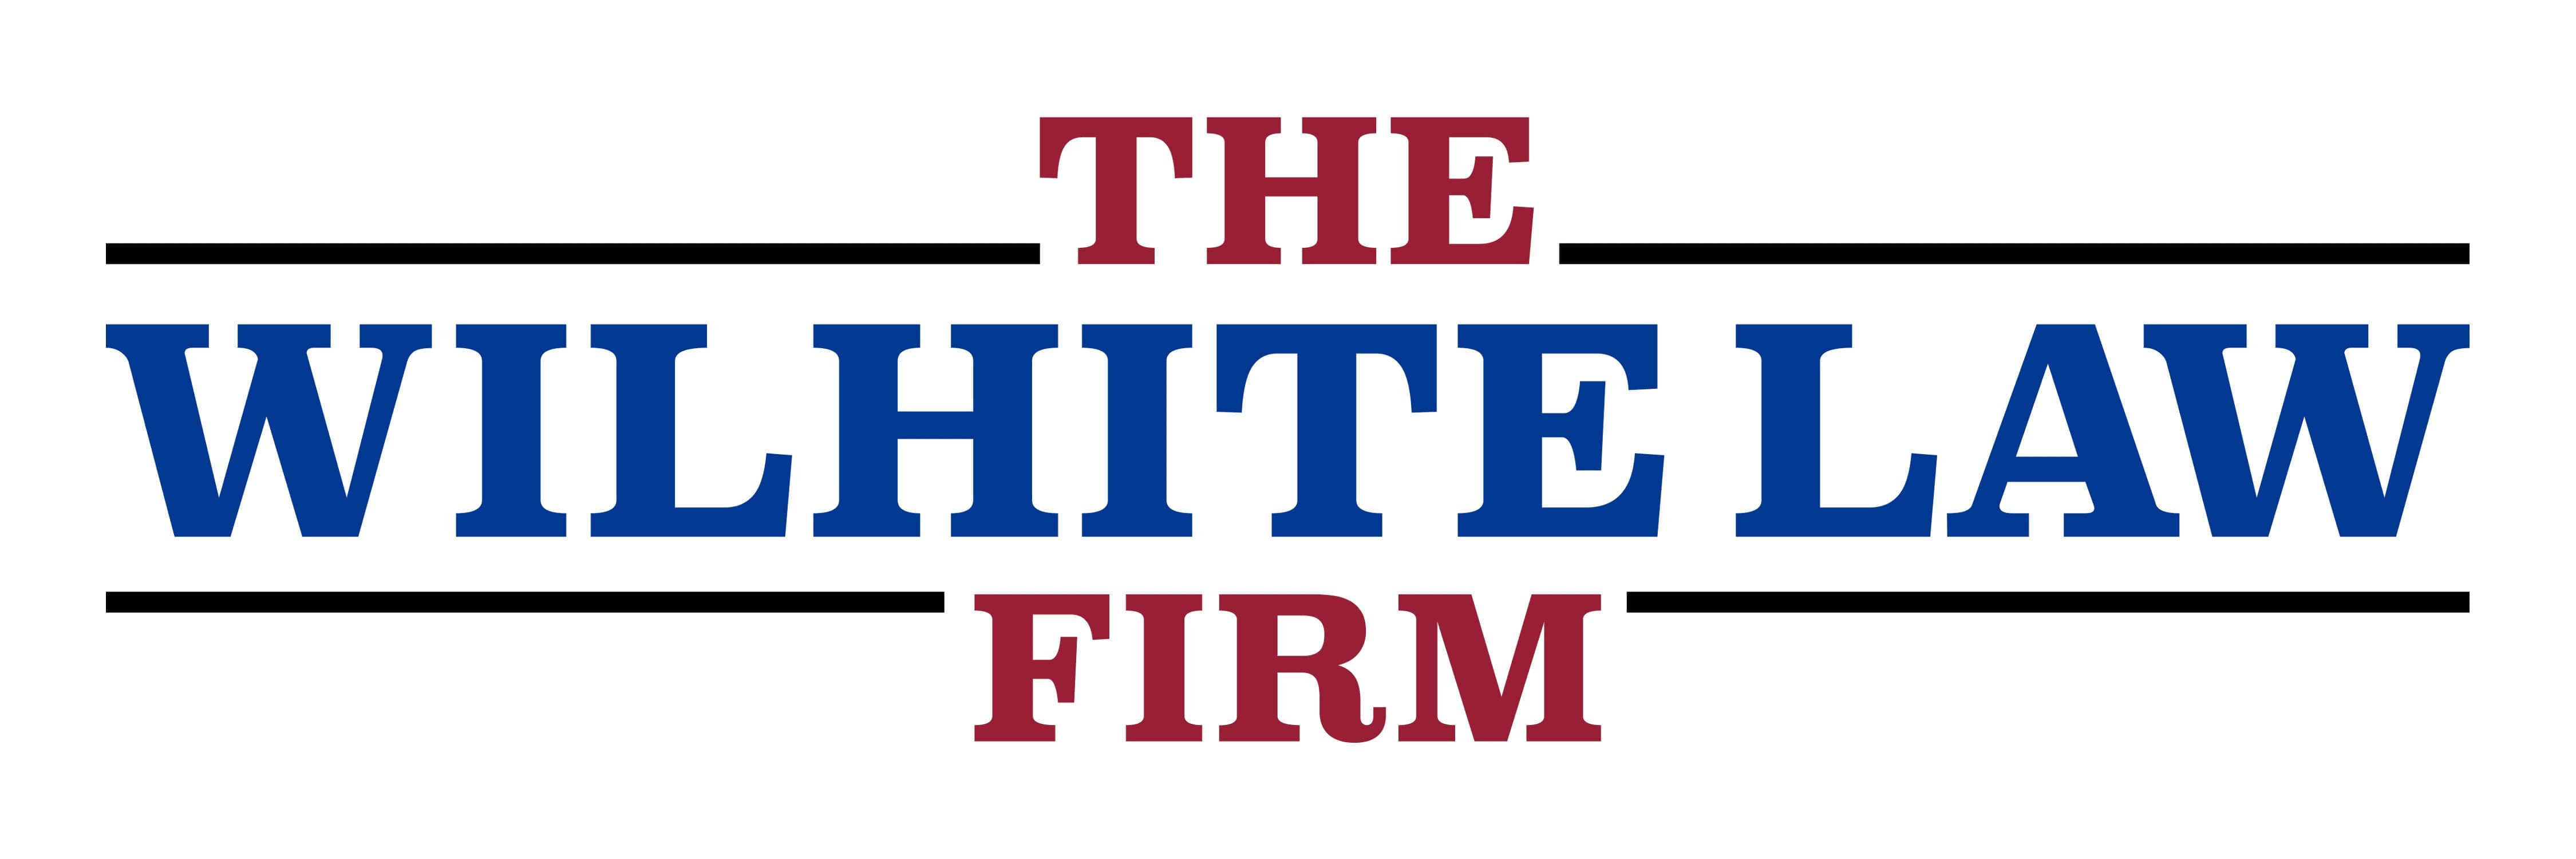 The Wilhite Law Firm - Colorado Springs, CO